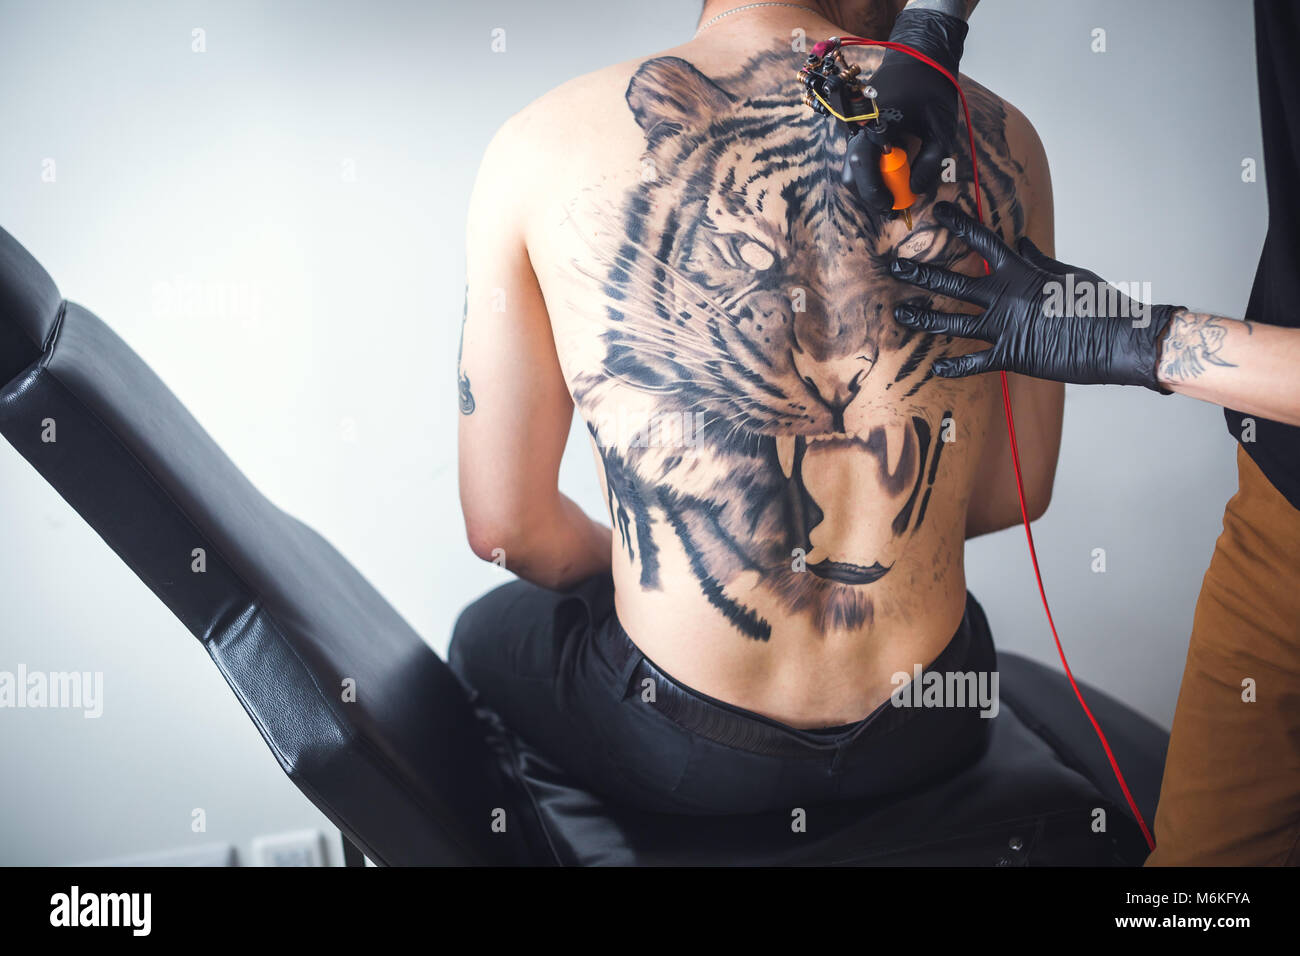 american traditional tiger chest tattoo｜TikTok Search